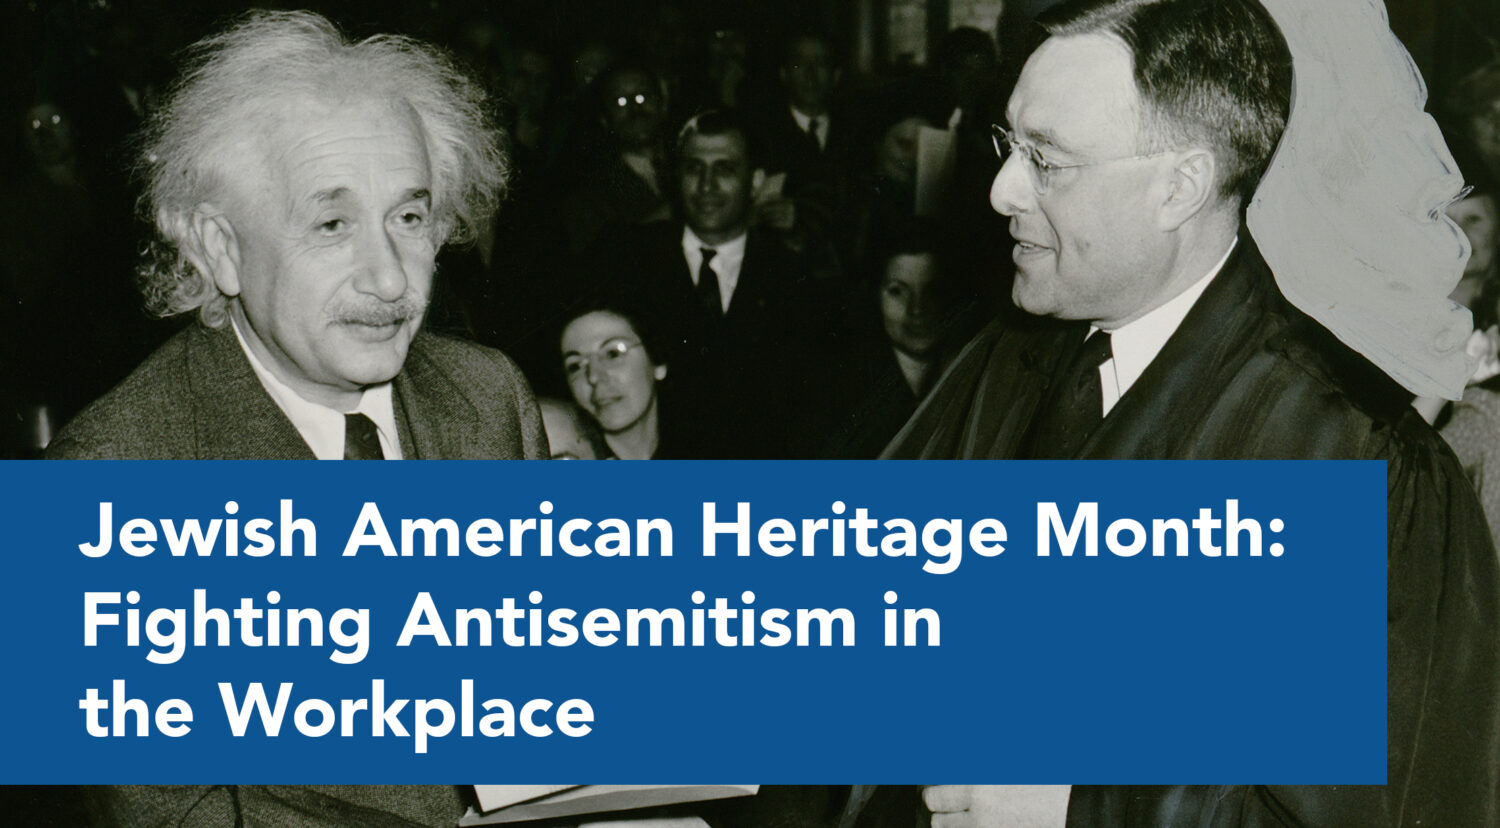 Jewish American Heritage Month: Fighting Antisemitism in the Workplace